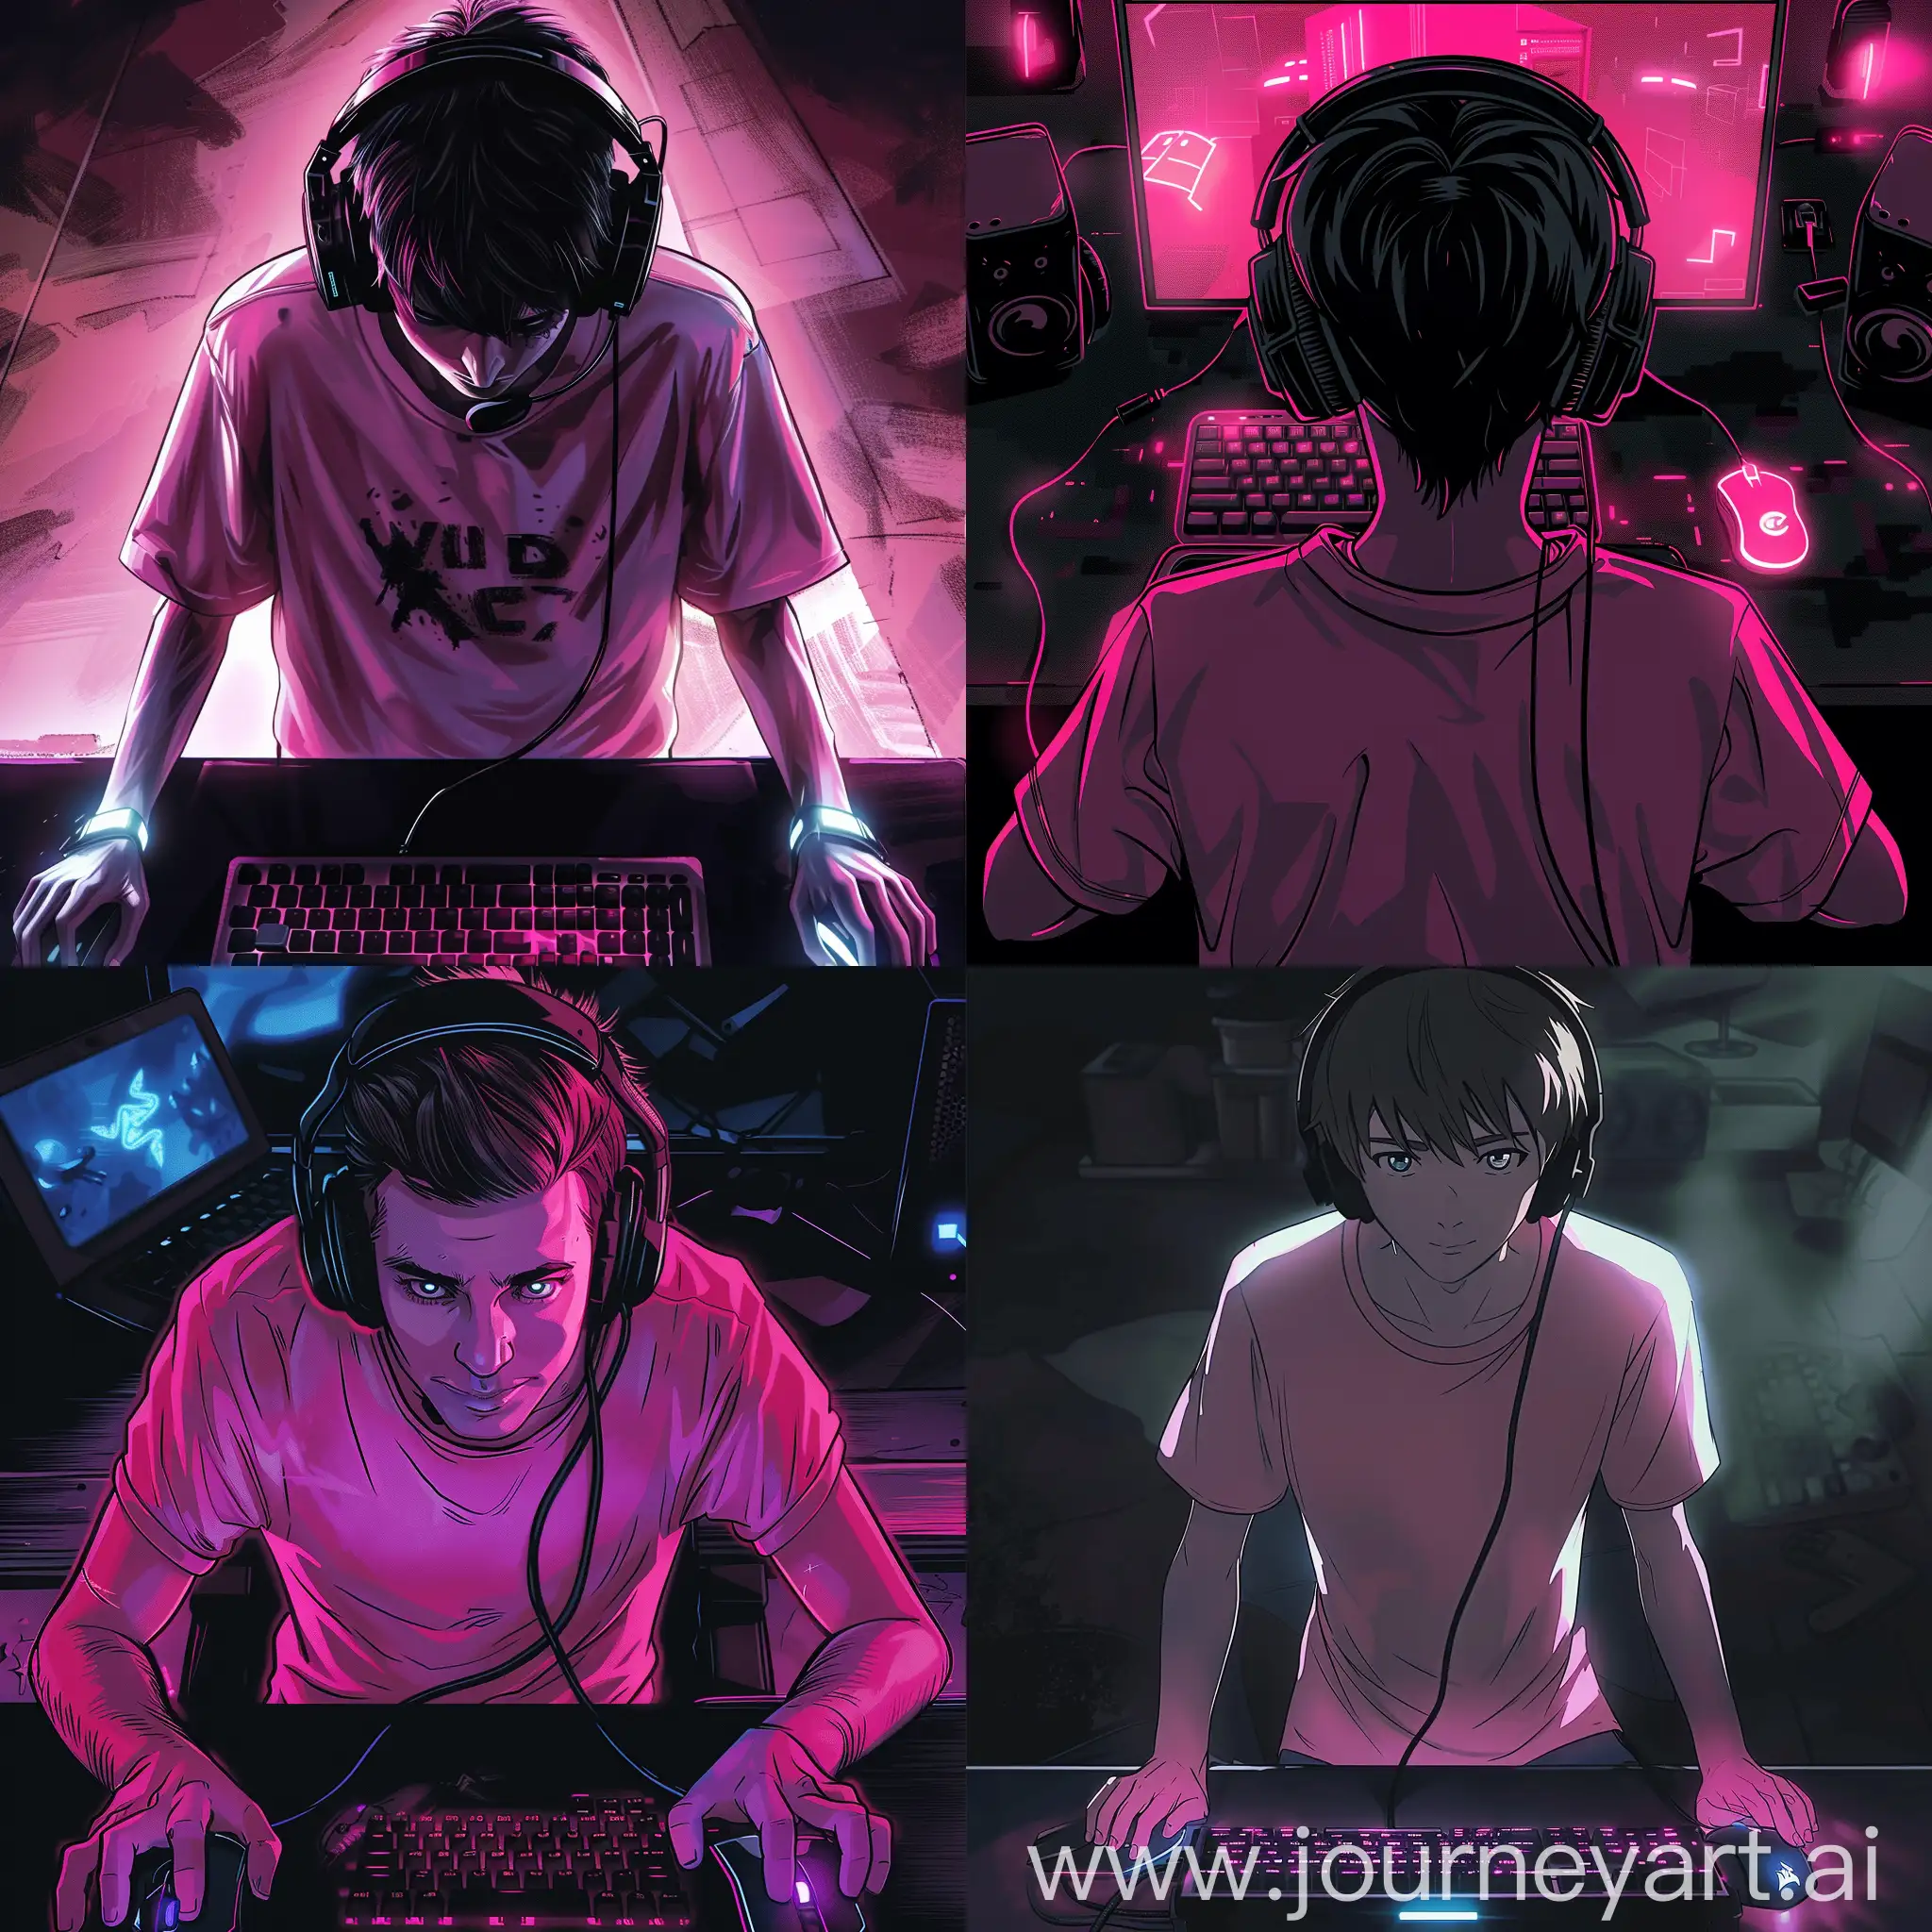 Gaming-Channel-Banner-Anime-Guy-in-Pink-TShirt-with-Glowing-Mouse-and-Keyboard